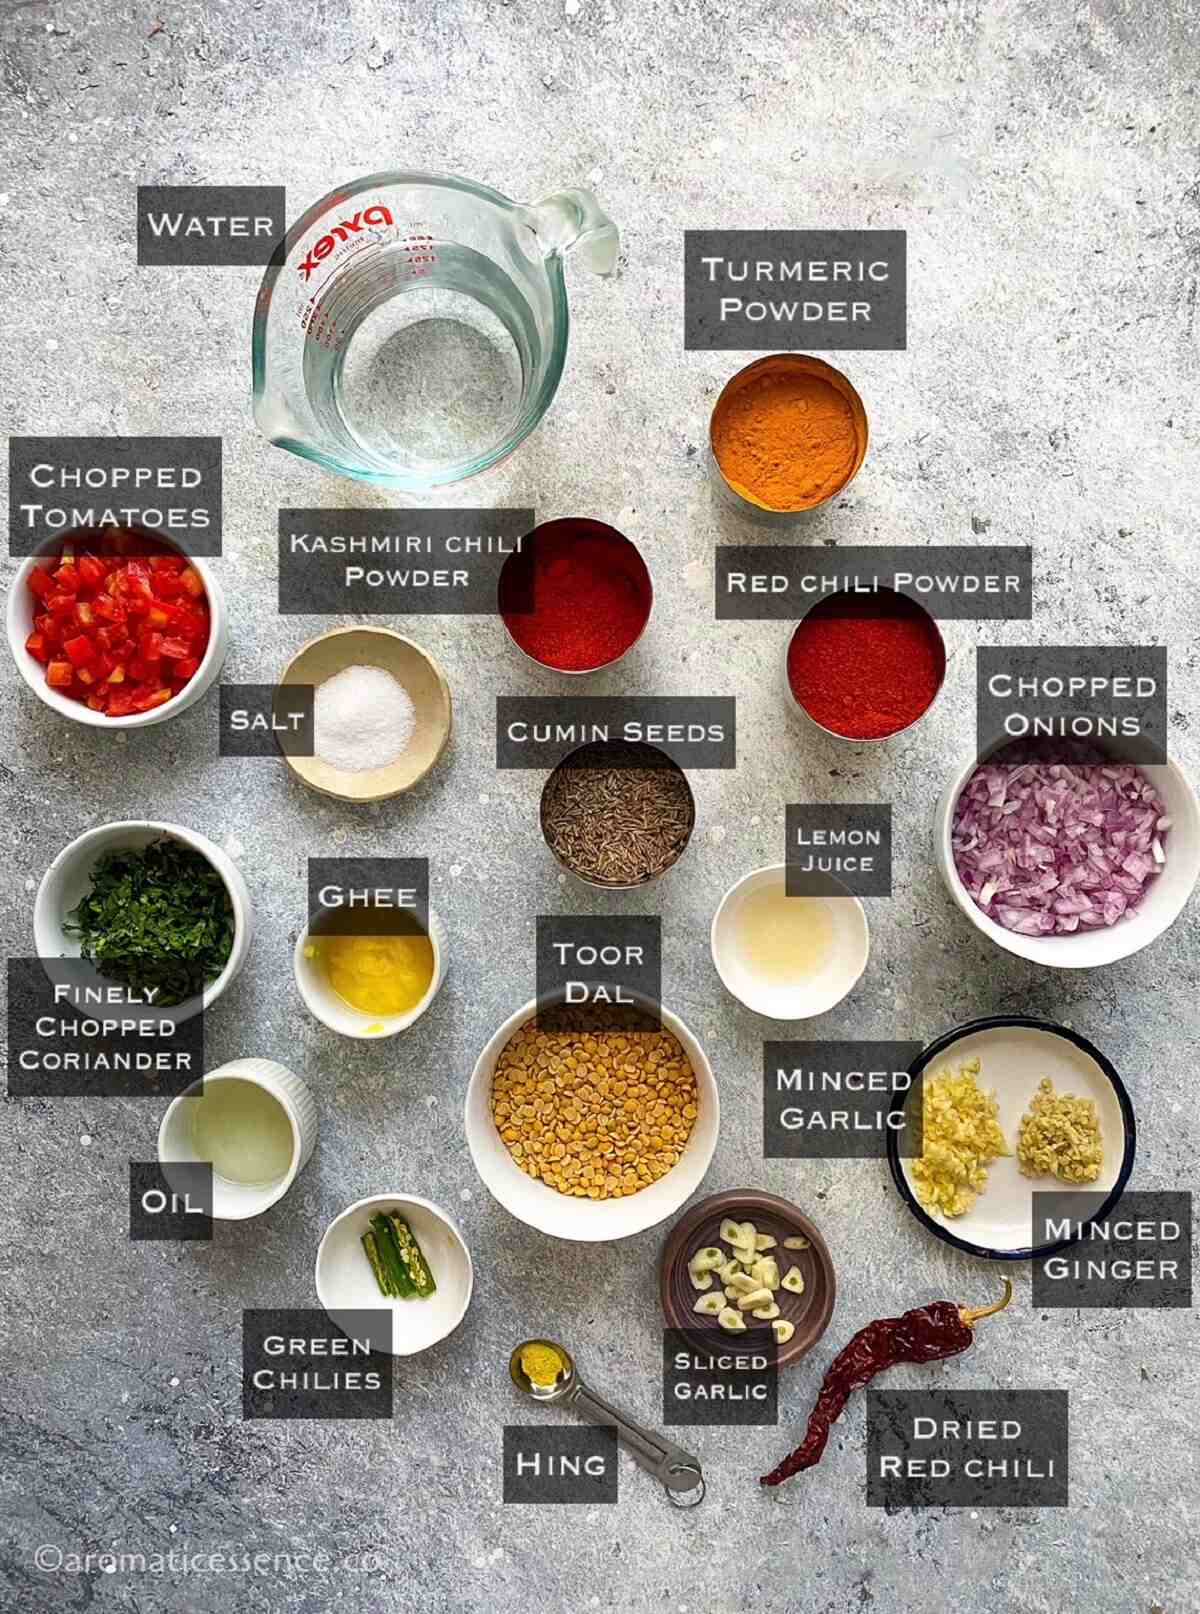 Ingredients needed for toor dal